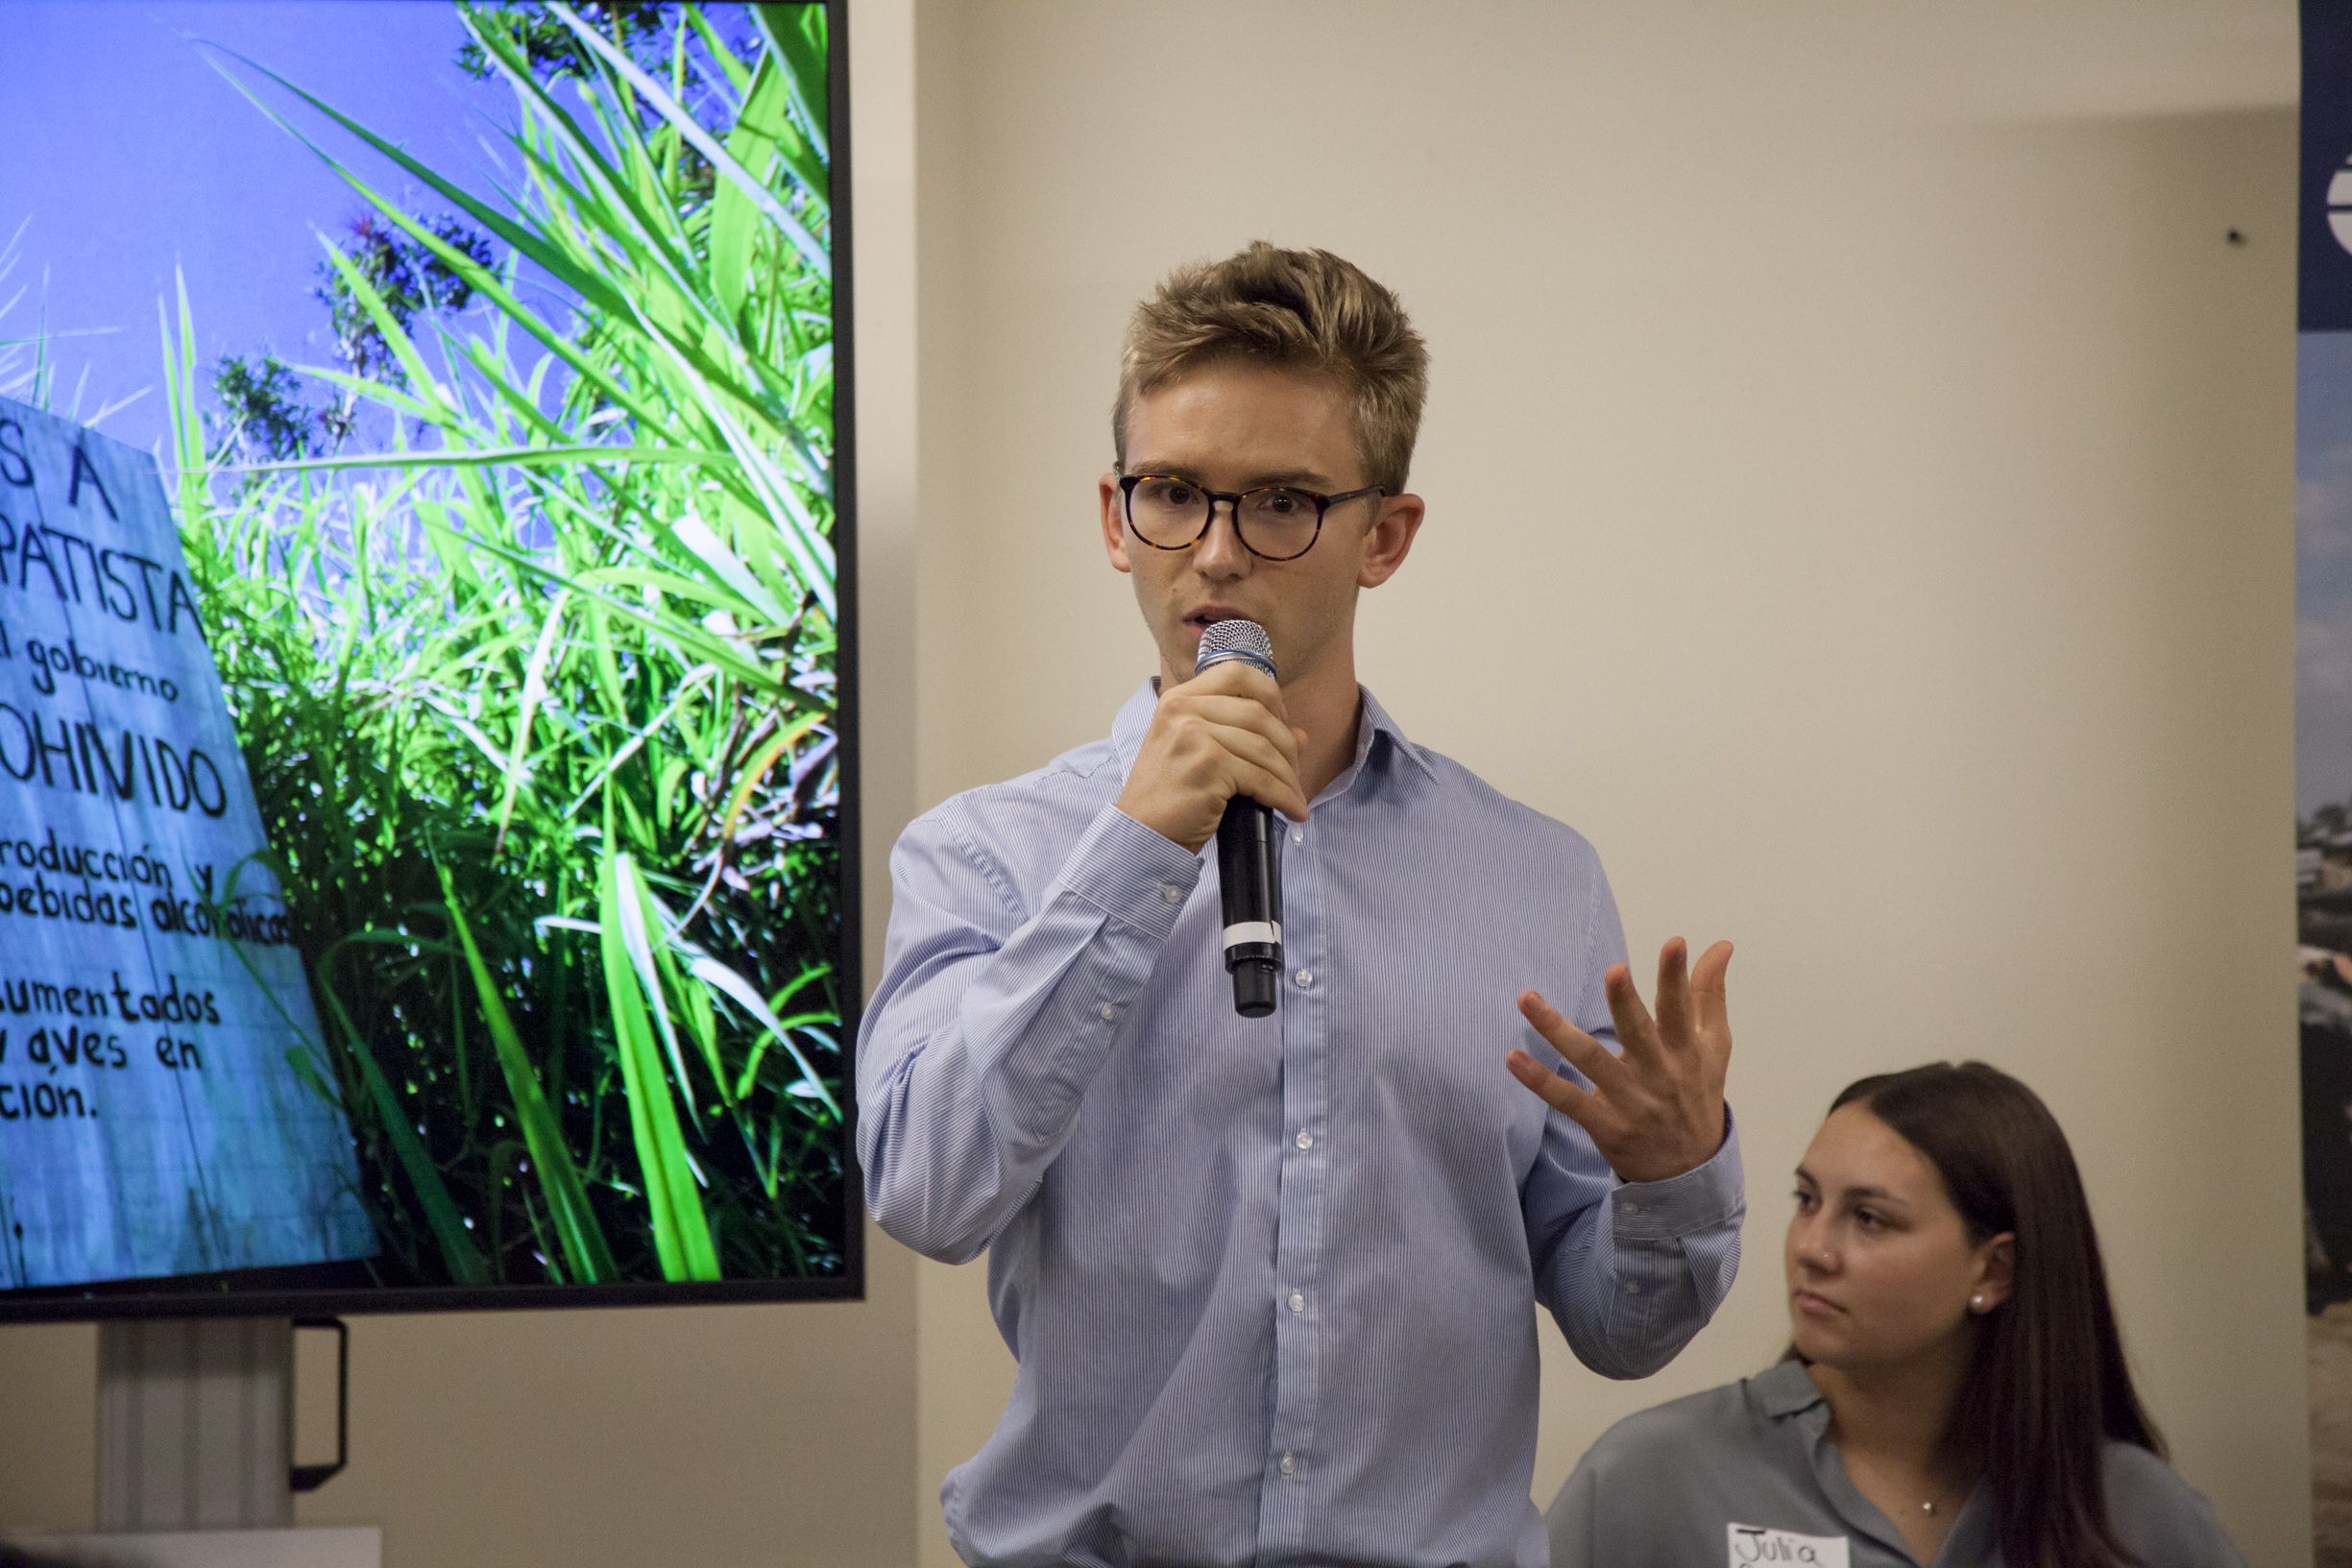 Jared Olson (Flagler College) presents his global reporting project at Washington Weekend. Image by Jin Ding. United States, 2018.